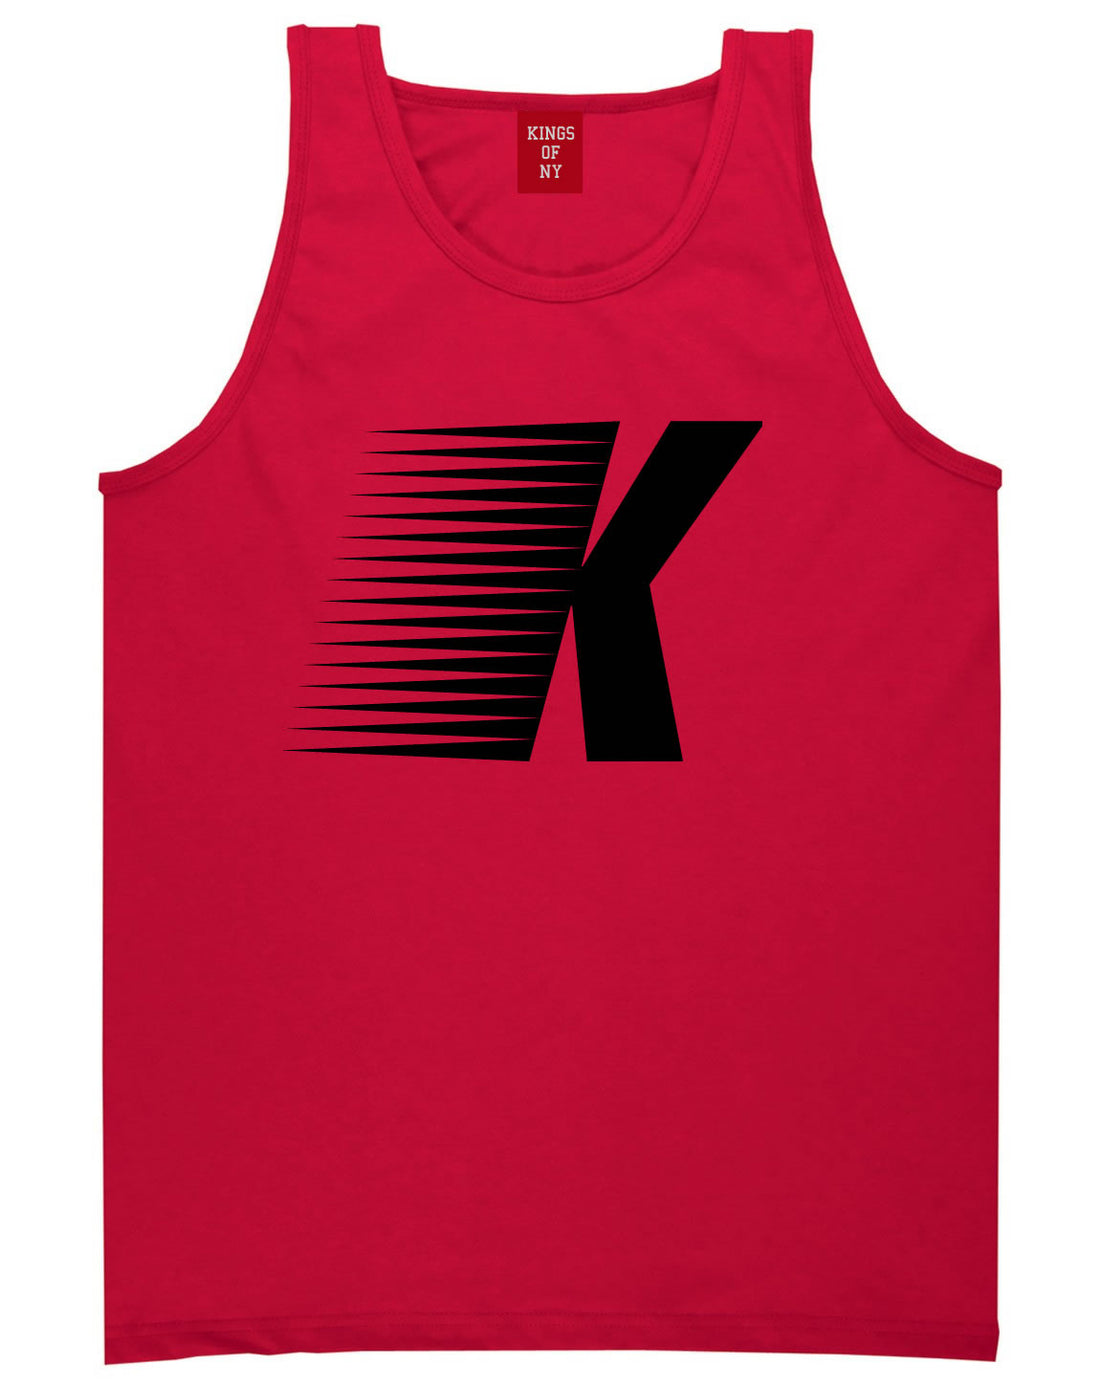 Flash K Running Fitness Style Tank Top in Red By Kings Of NY